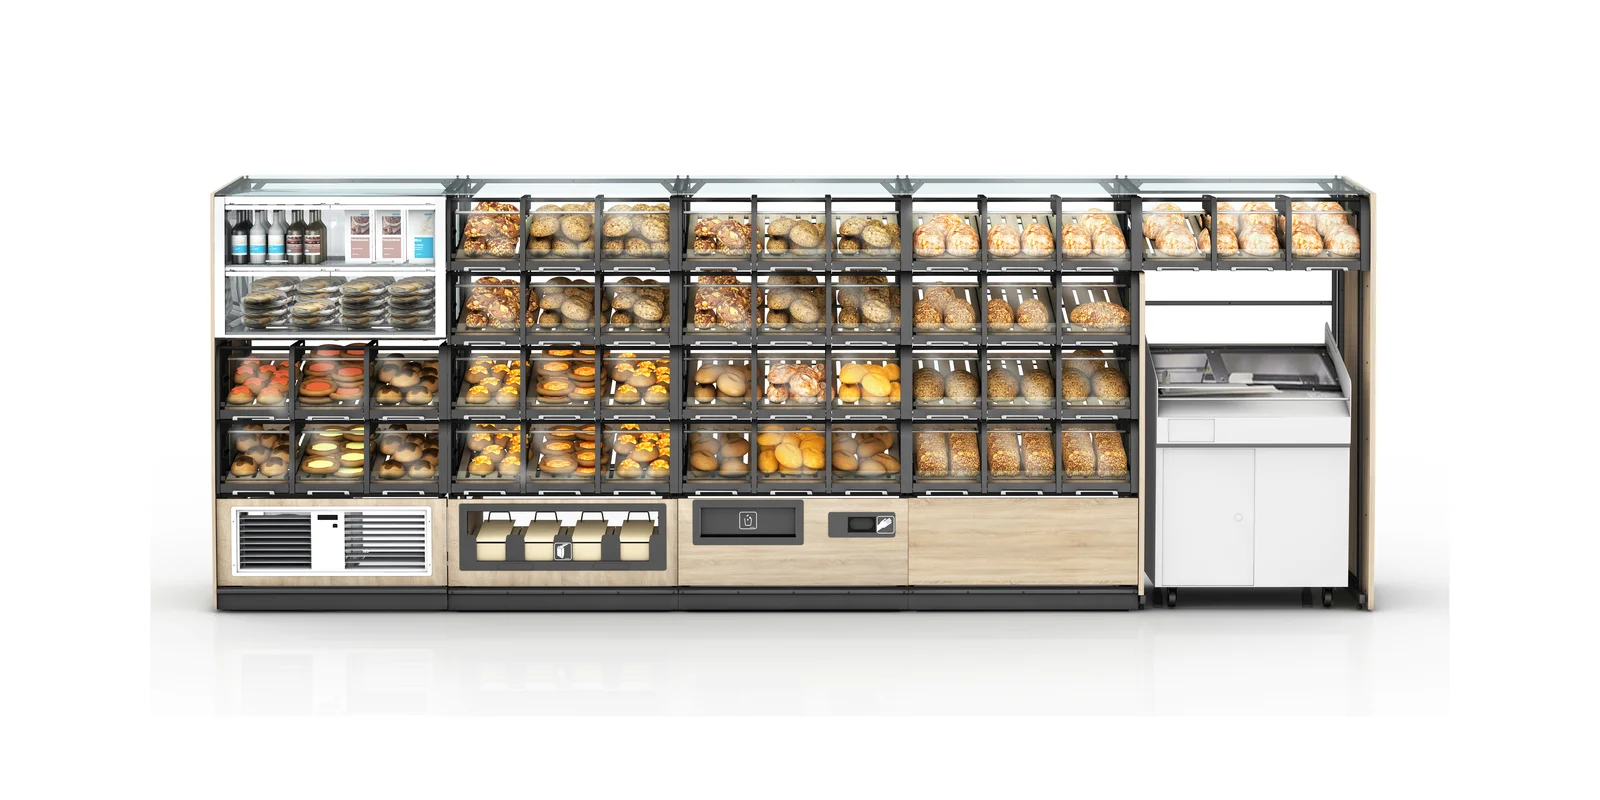 DEBAG Presents In-store Baking Oven at EuroShop 2020 – WorldBakers